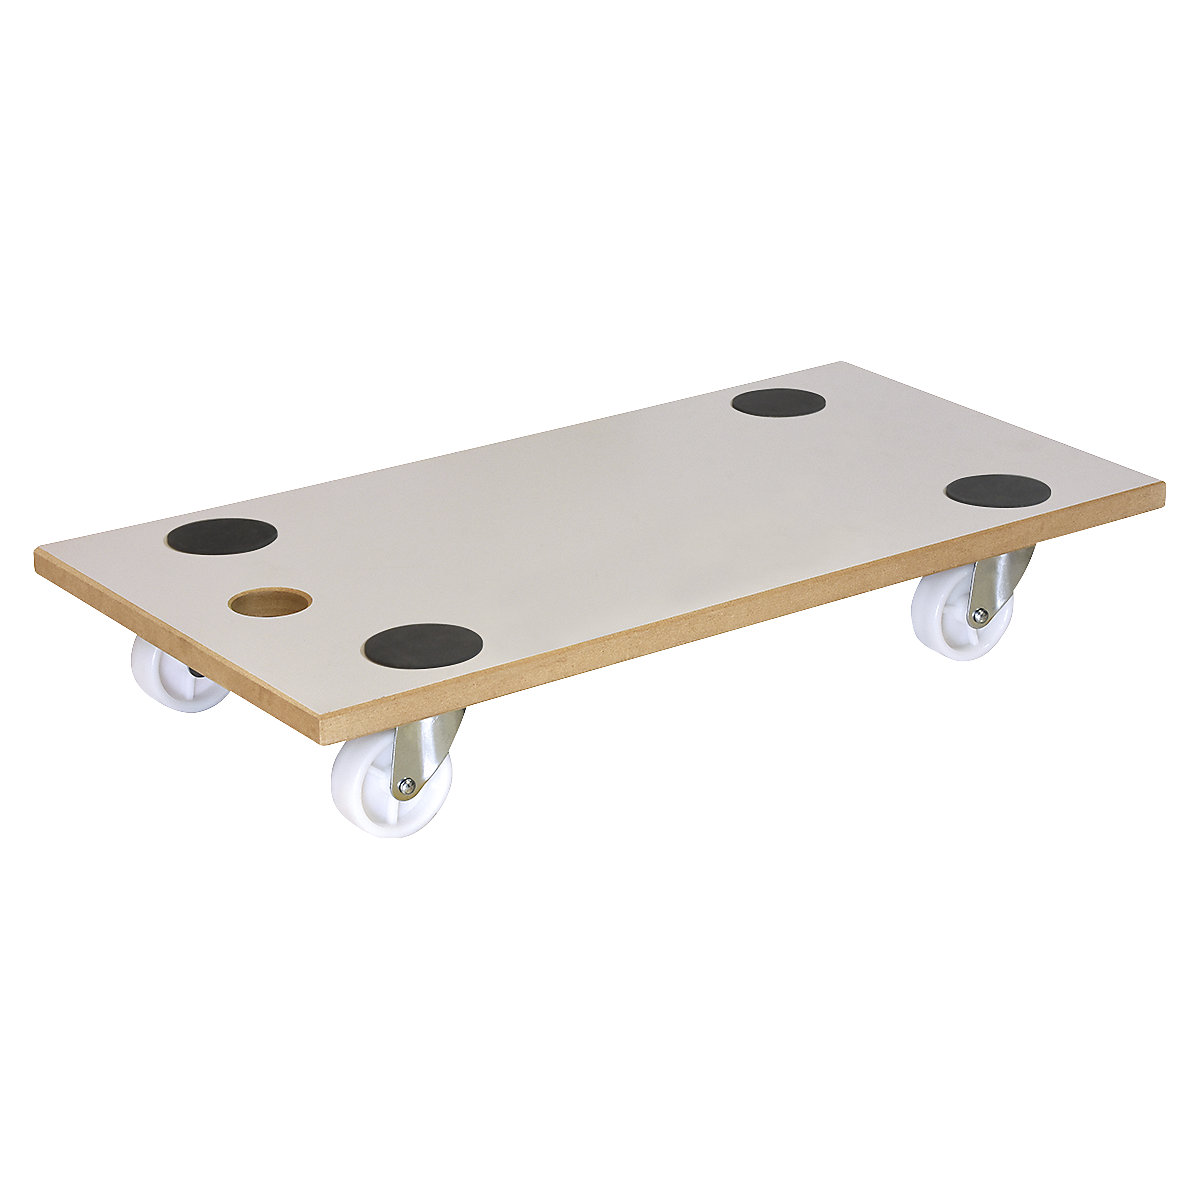 Transport dolly with grip hole – Wagner, MM 1319, castors for soft floors, pack of 2, LxW 575 x 300 mm, 5+ packs-5